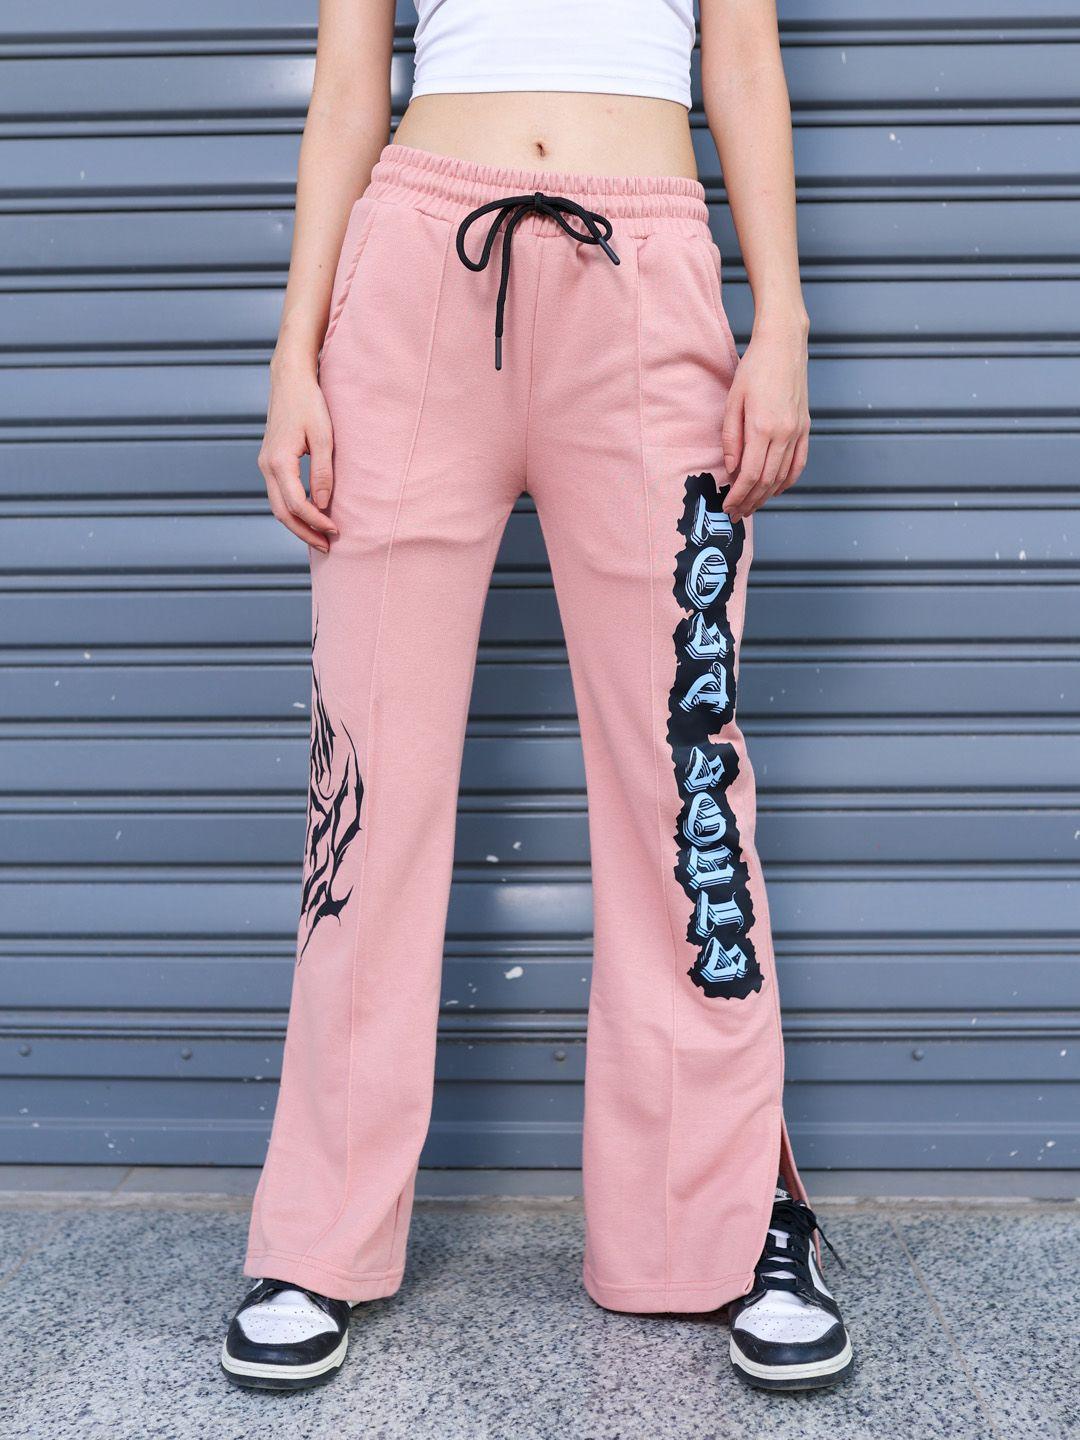 stylecast x hersheinbox women pure cotton printed trousers